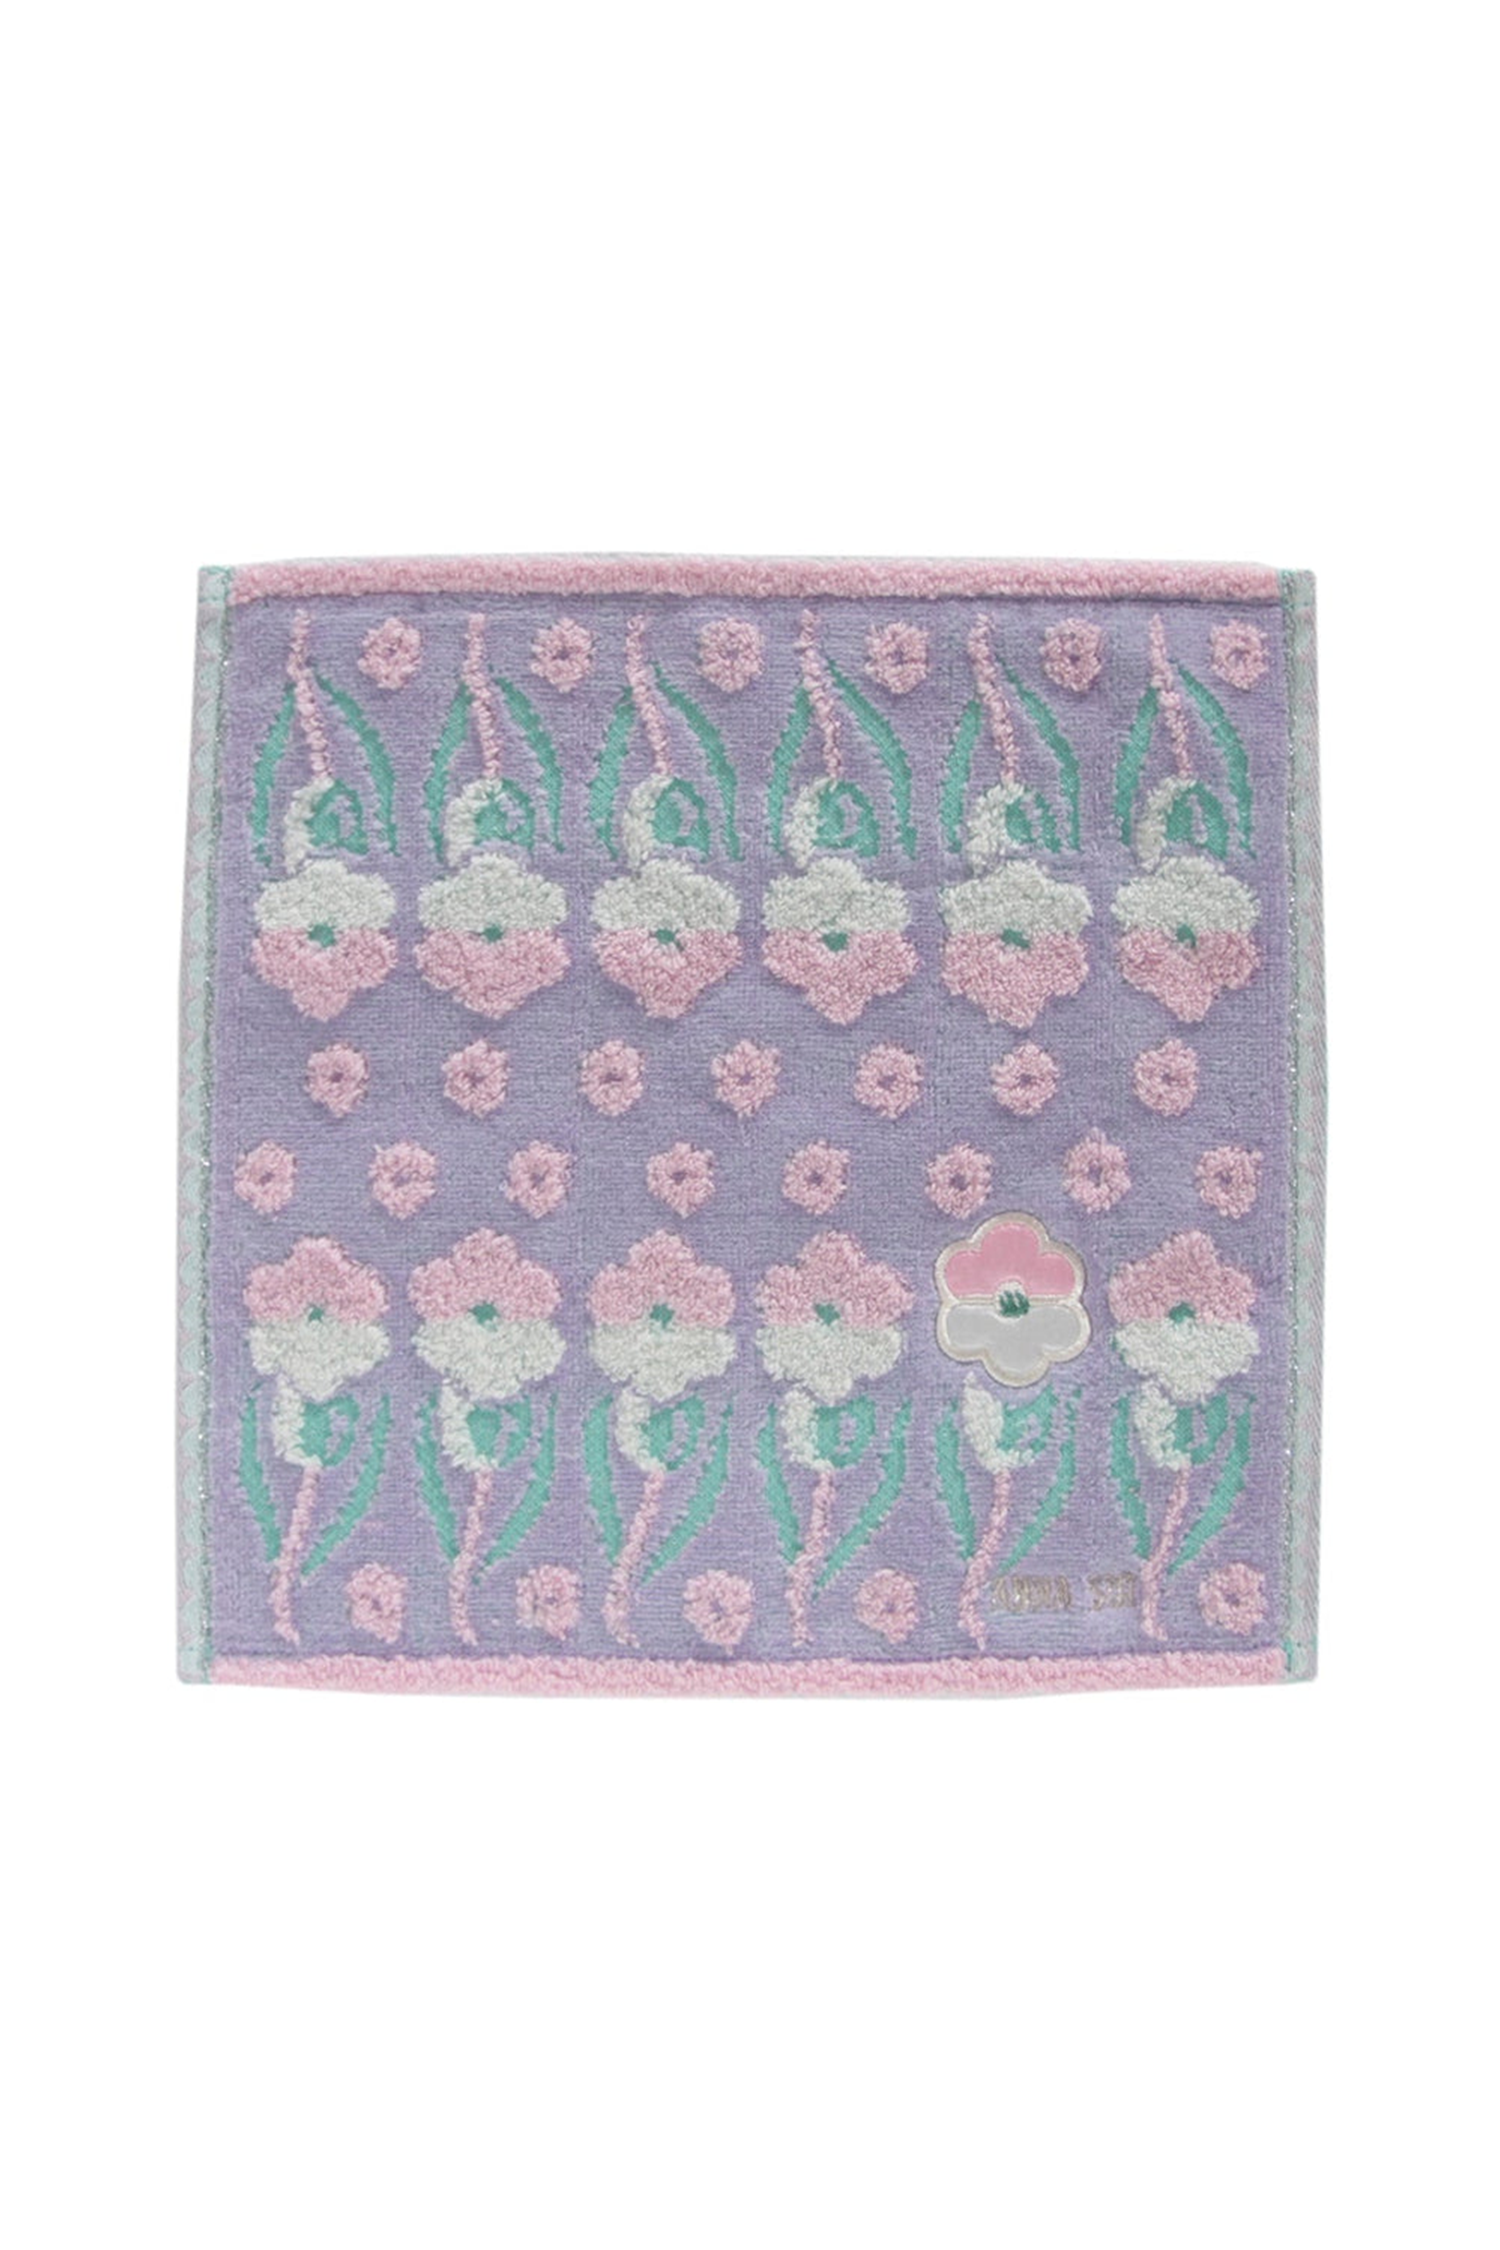 Other side of Pansy Panel Washcloth, black with 2lines of white/purple Pansy, Anna Sui label at bottom 